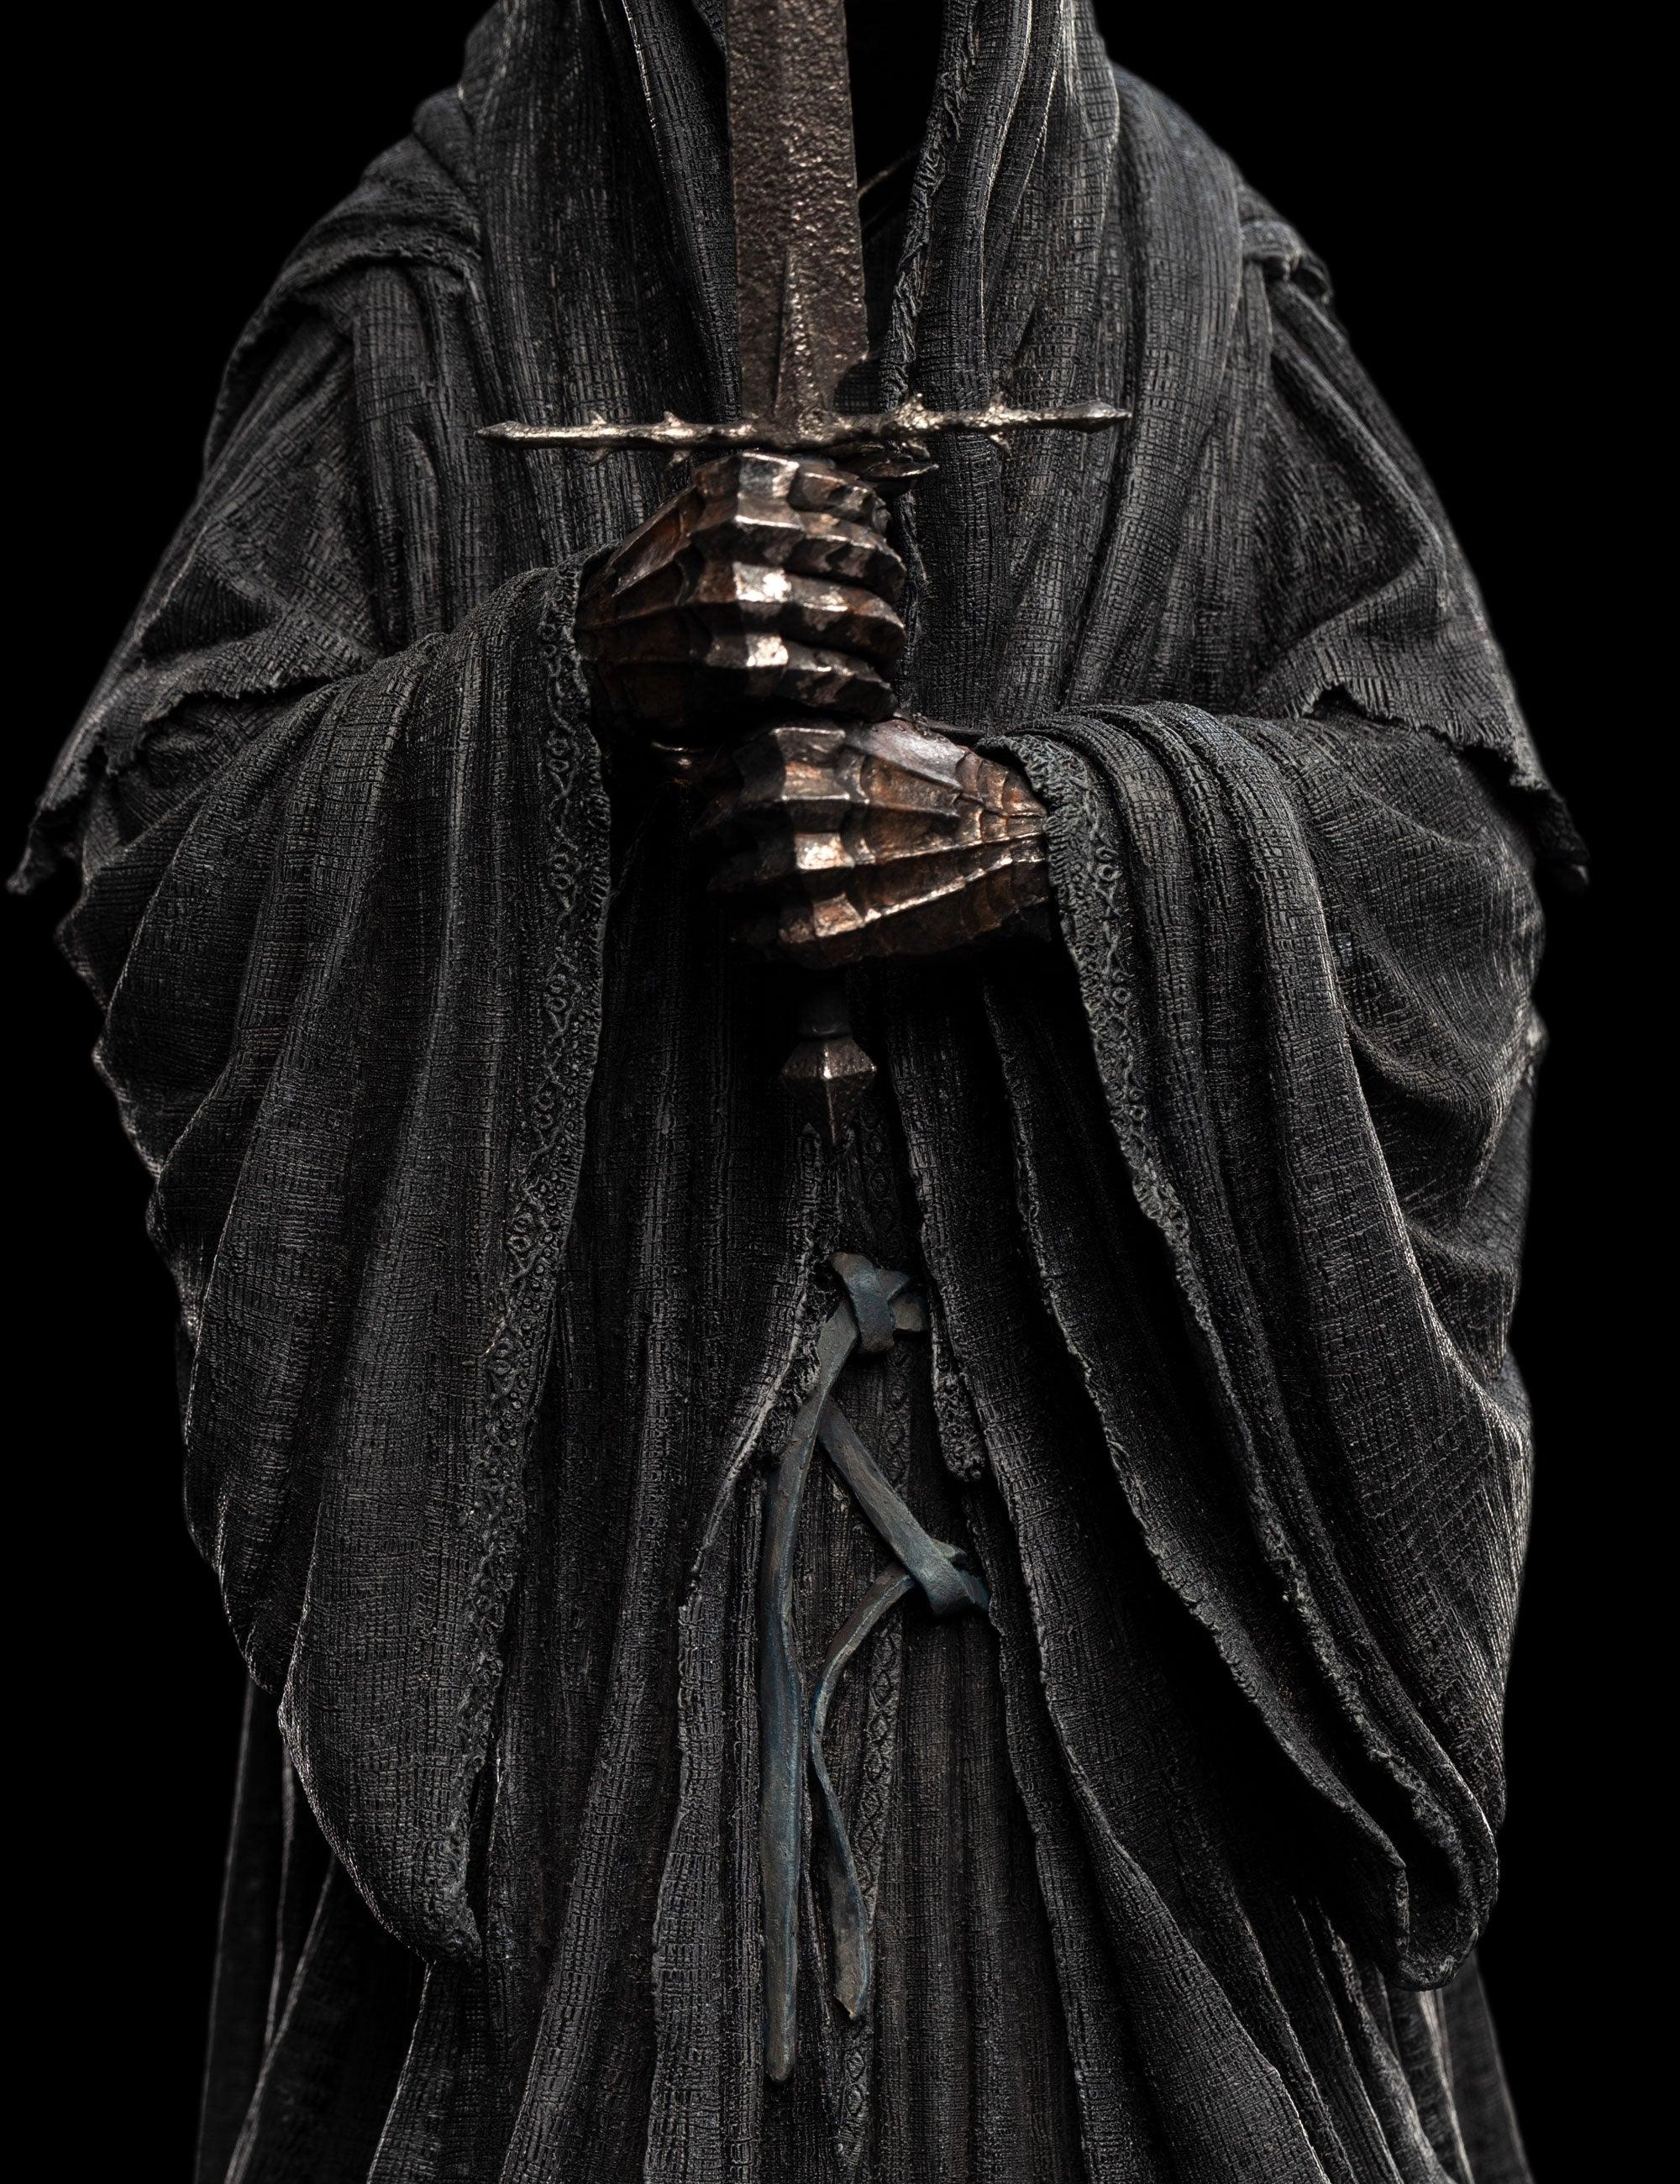 WET03265 The Lord of the Rings - Ringwraith of Mordor 1:6 Scale Statue - Weta Workshop - Titan Pop Culture